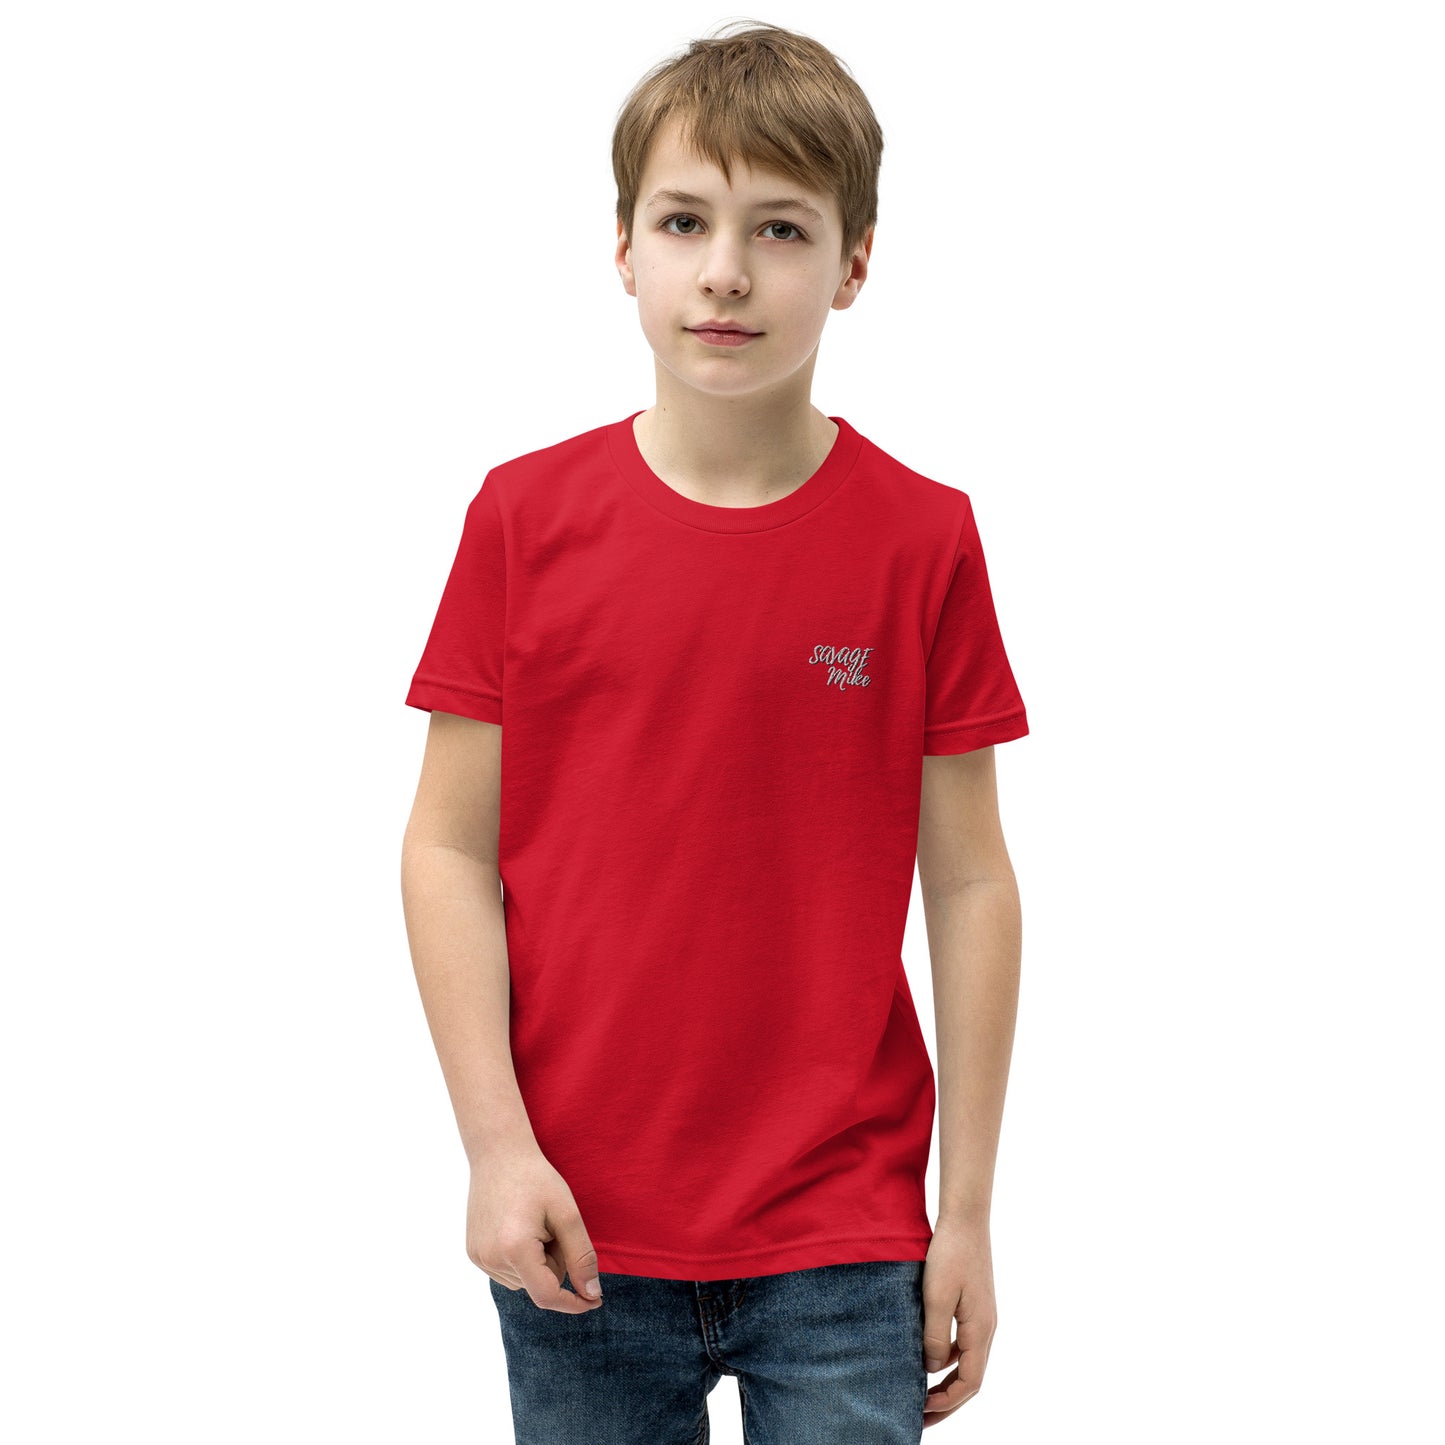 Youth Signature Savage Mike Short Sleeve T-Shirt